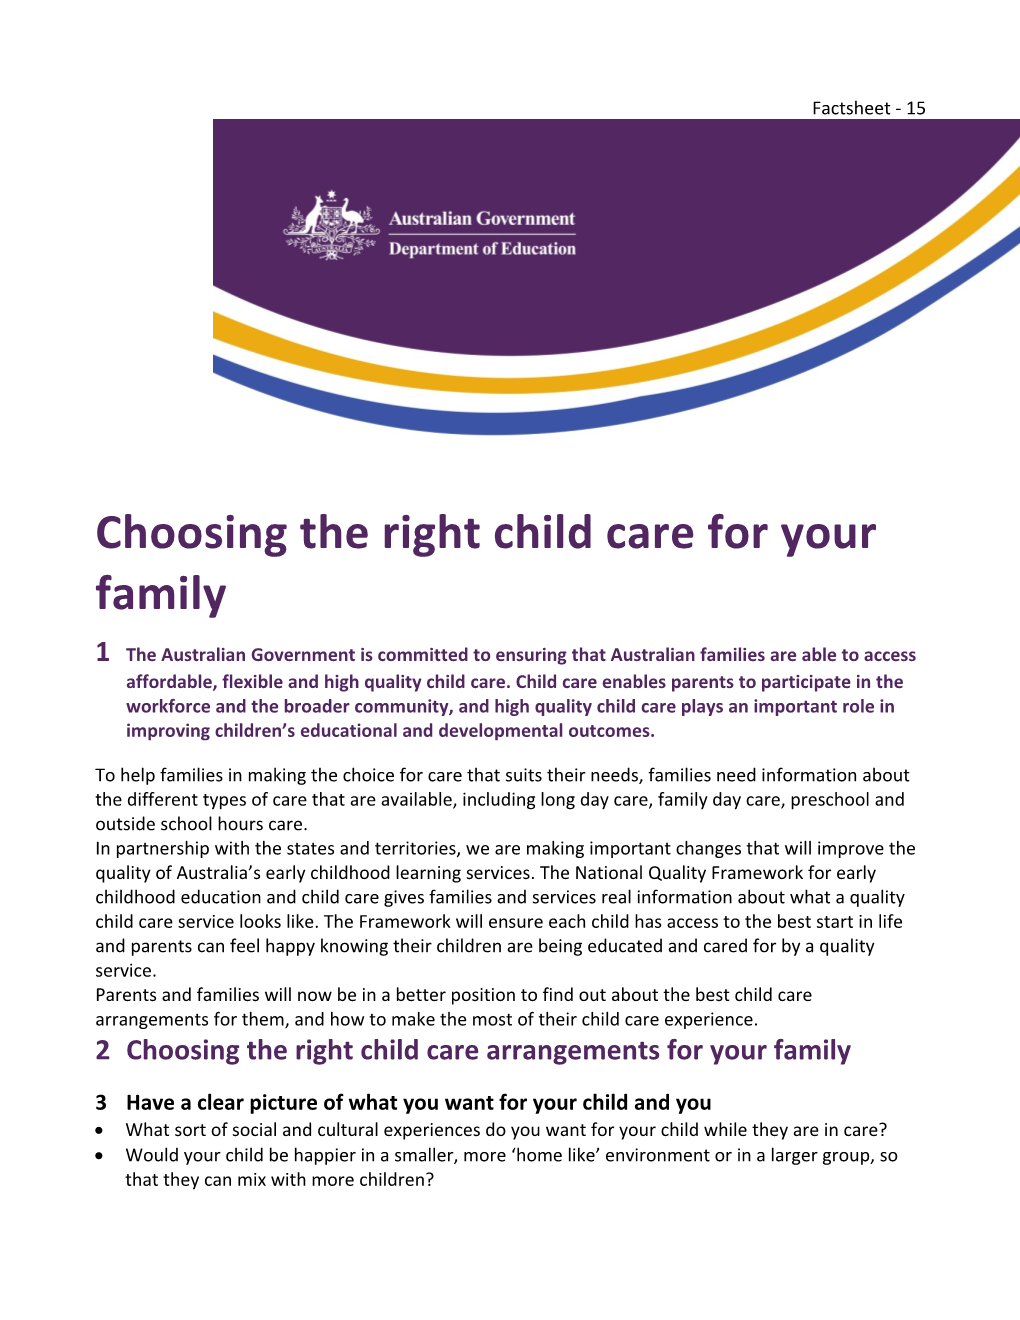 Choosing the Right Child Care for Your Family